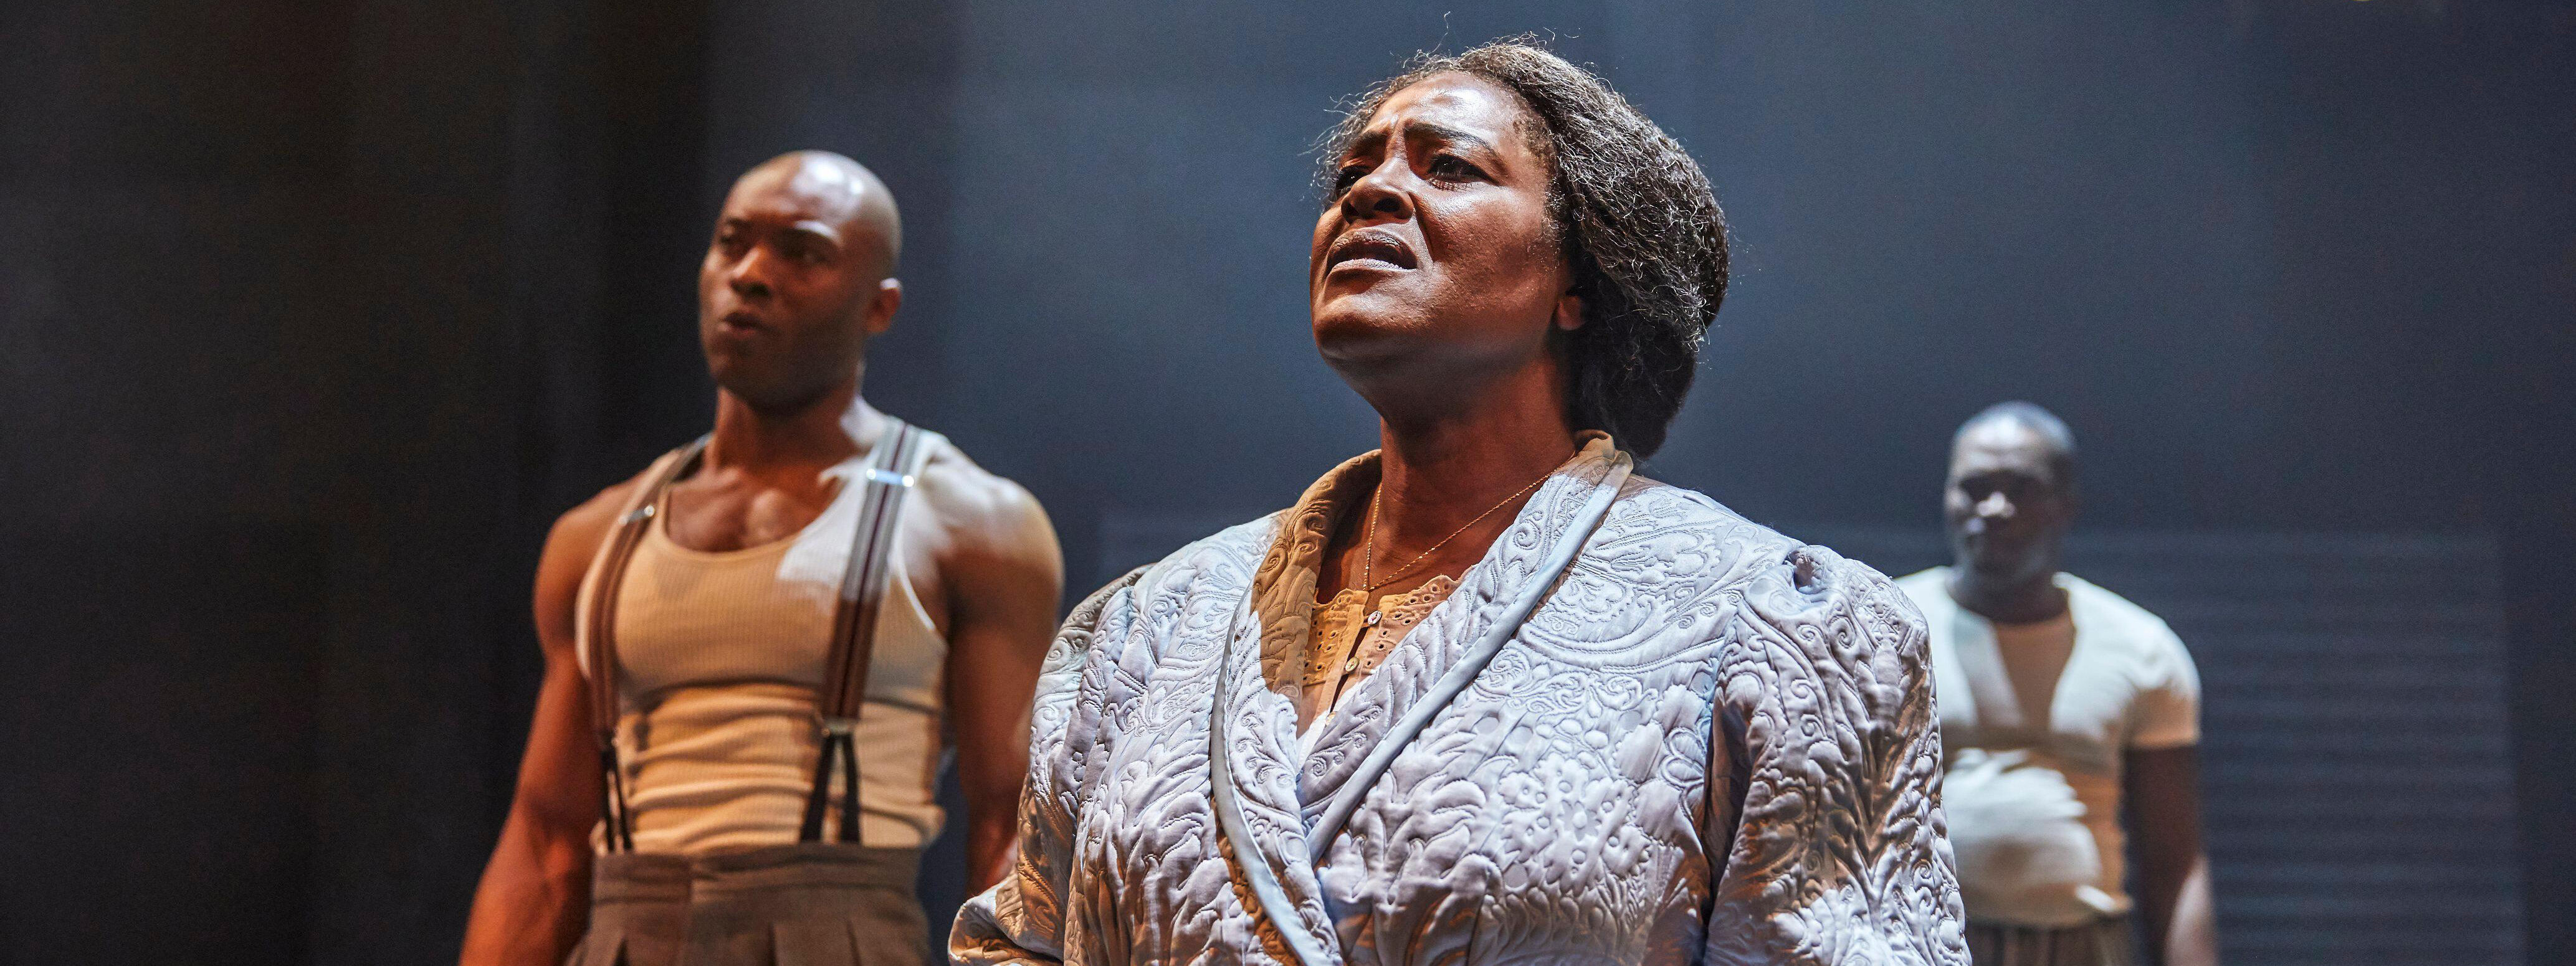 Sharon D Clarke in Death of a Salesman - on stage with co-stars 